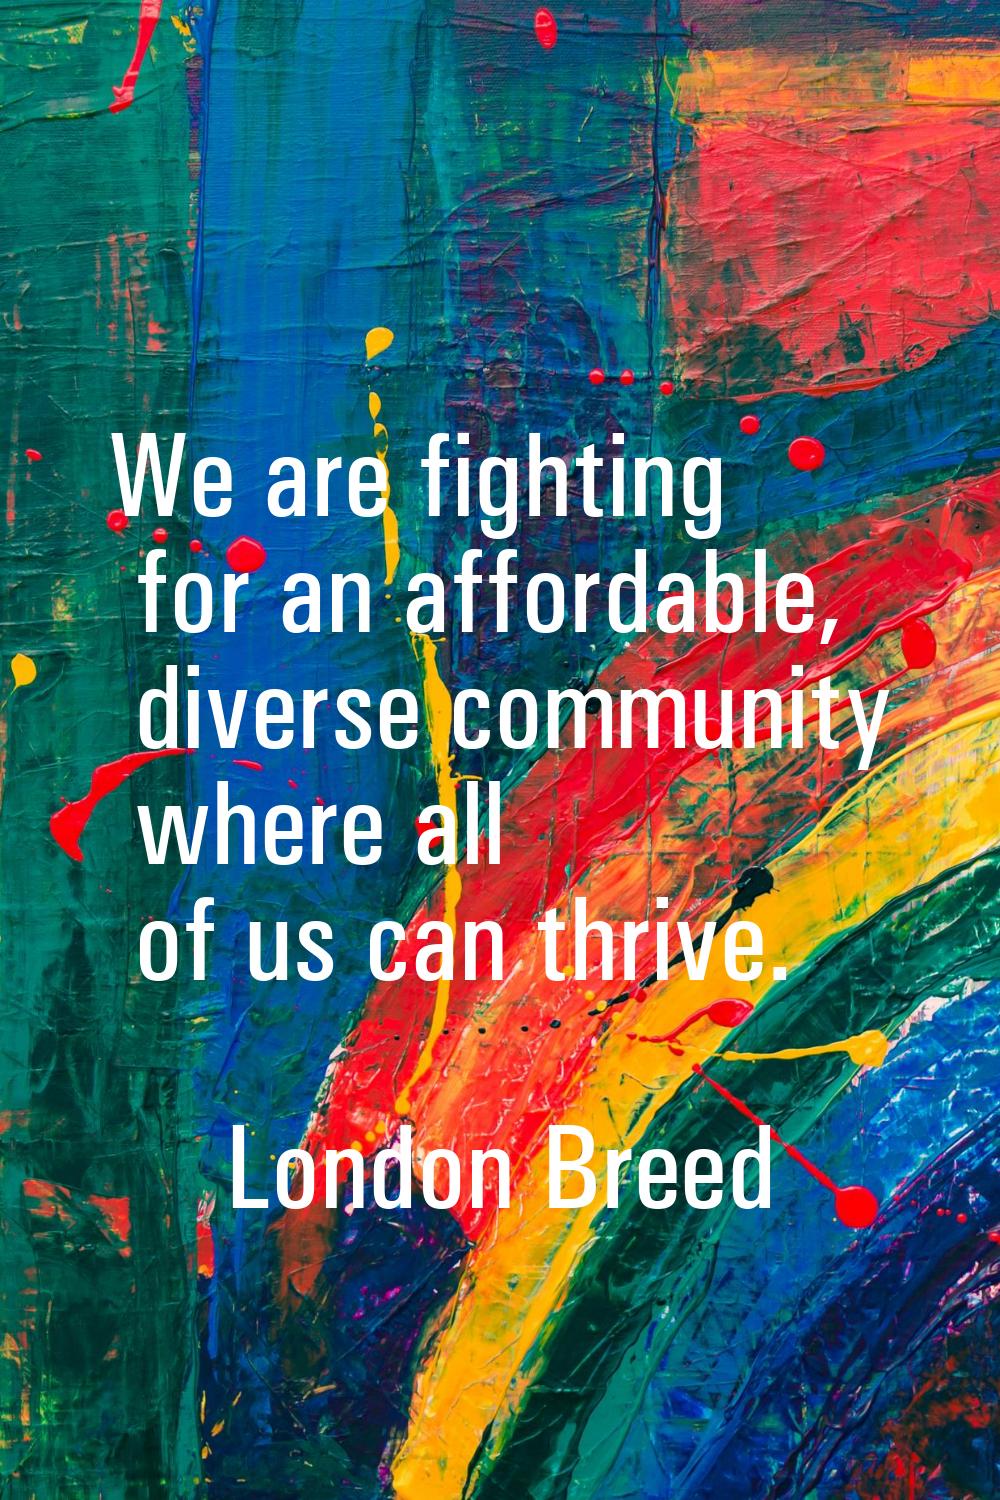 We are fighting for an affordable, diverse community where all of us can thrive.